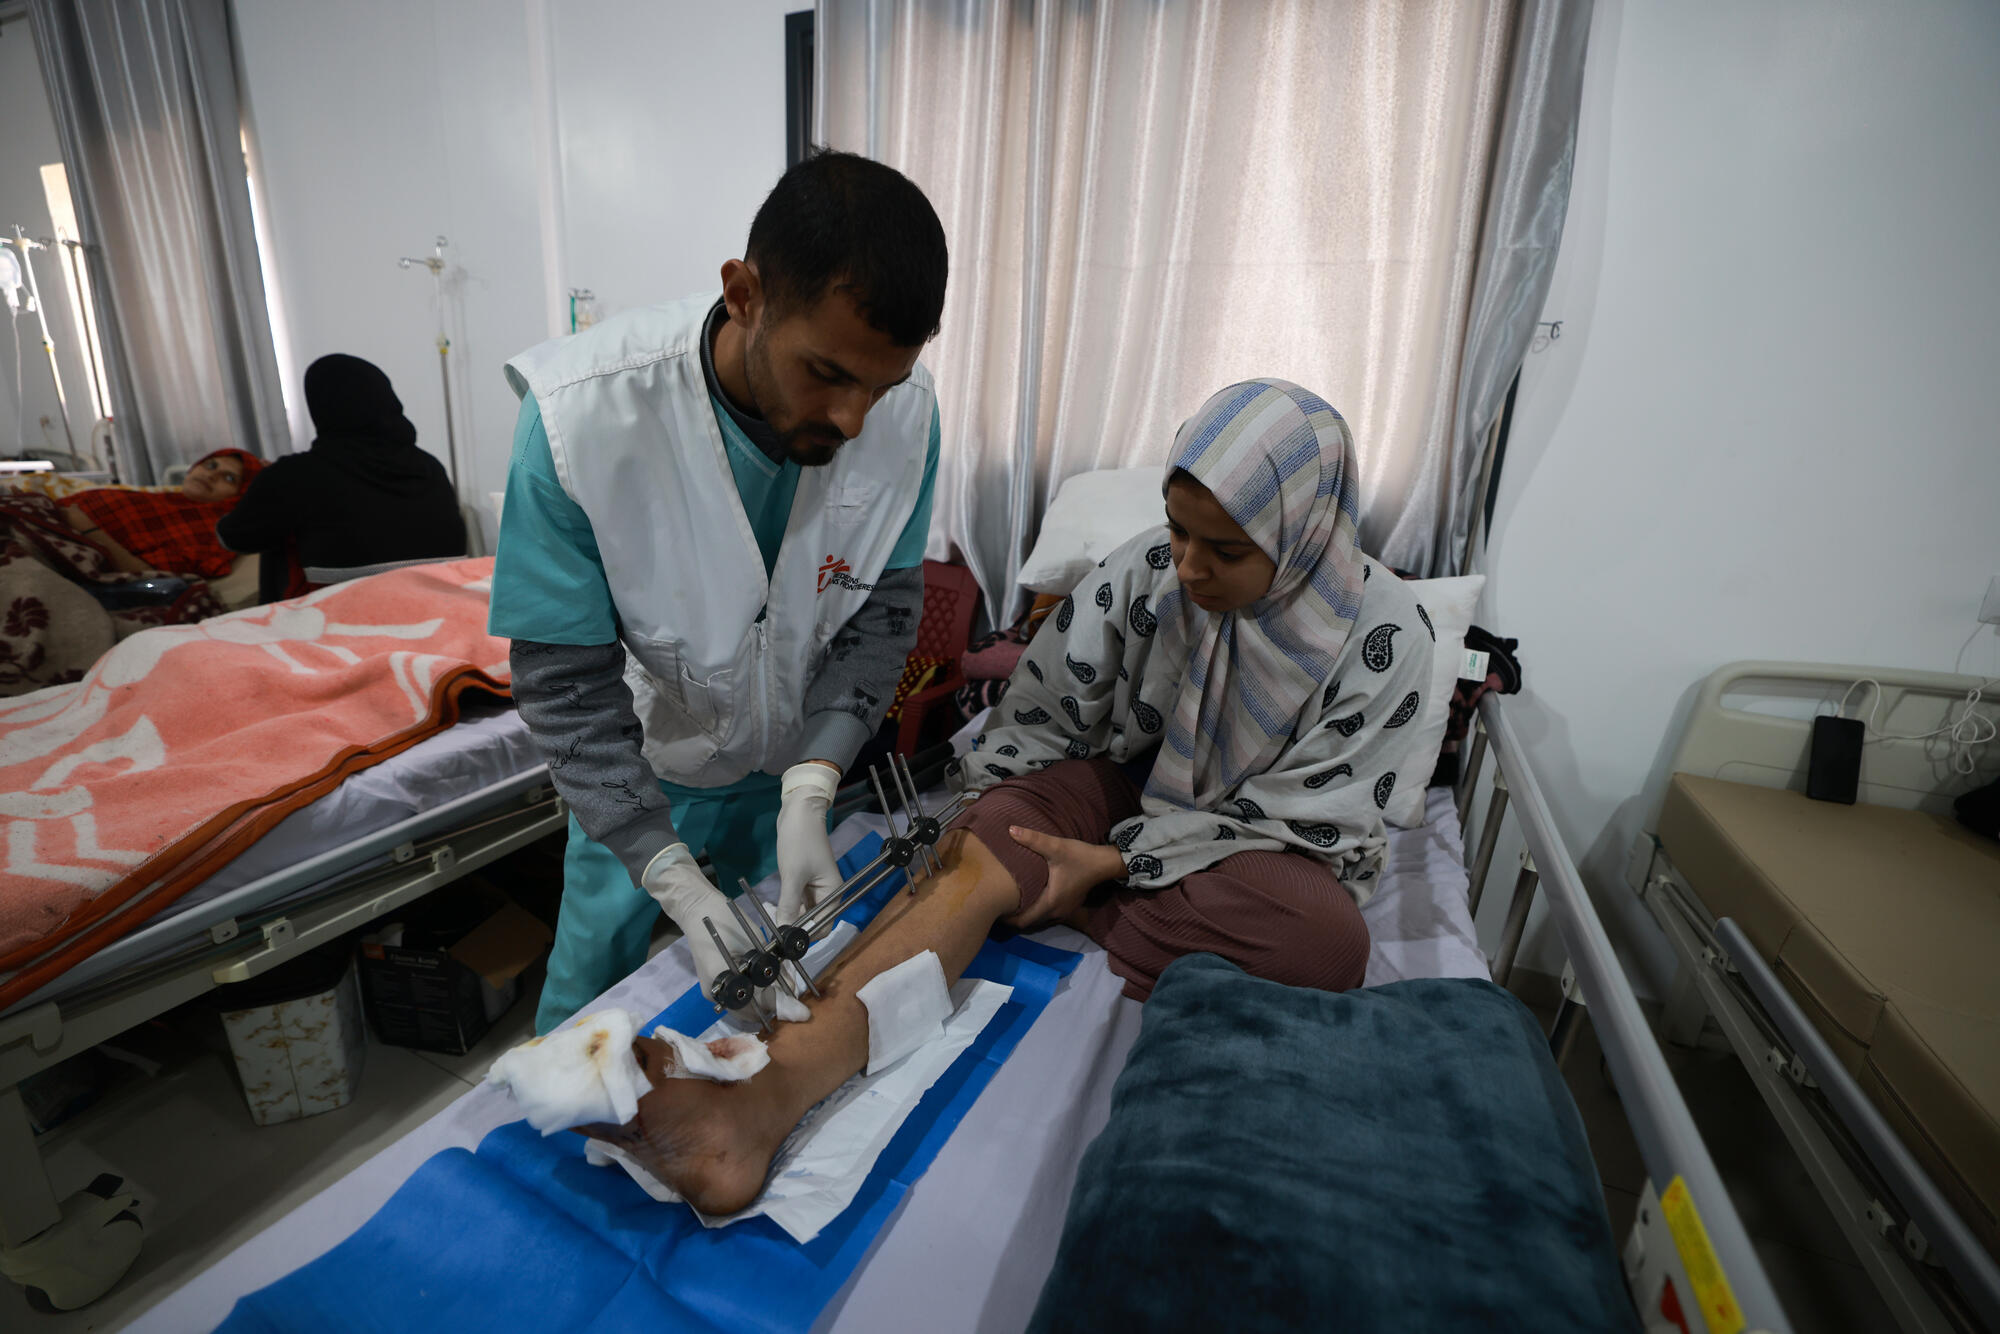 In Rafah, an MSF medic checks on a war-wounded patient who was forced to flee Al-Aqsa Hospital in Gaza's Middle Area